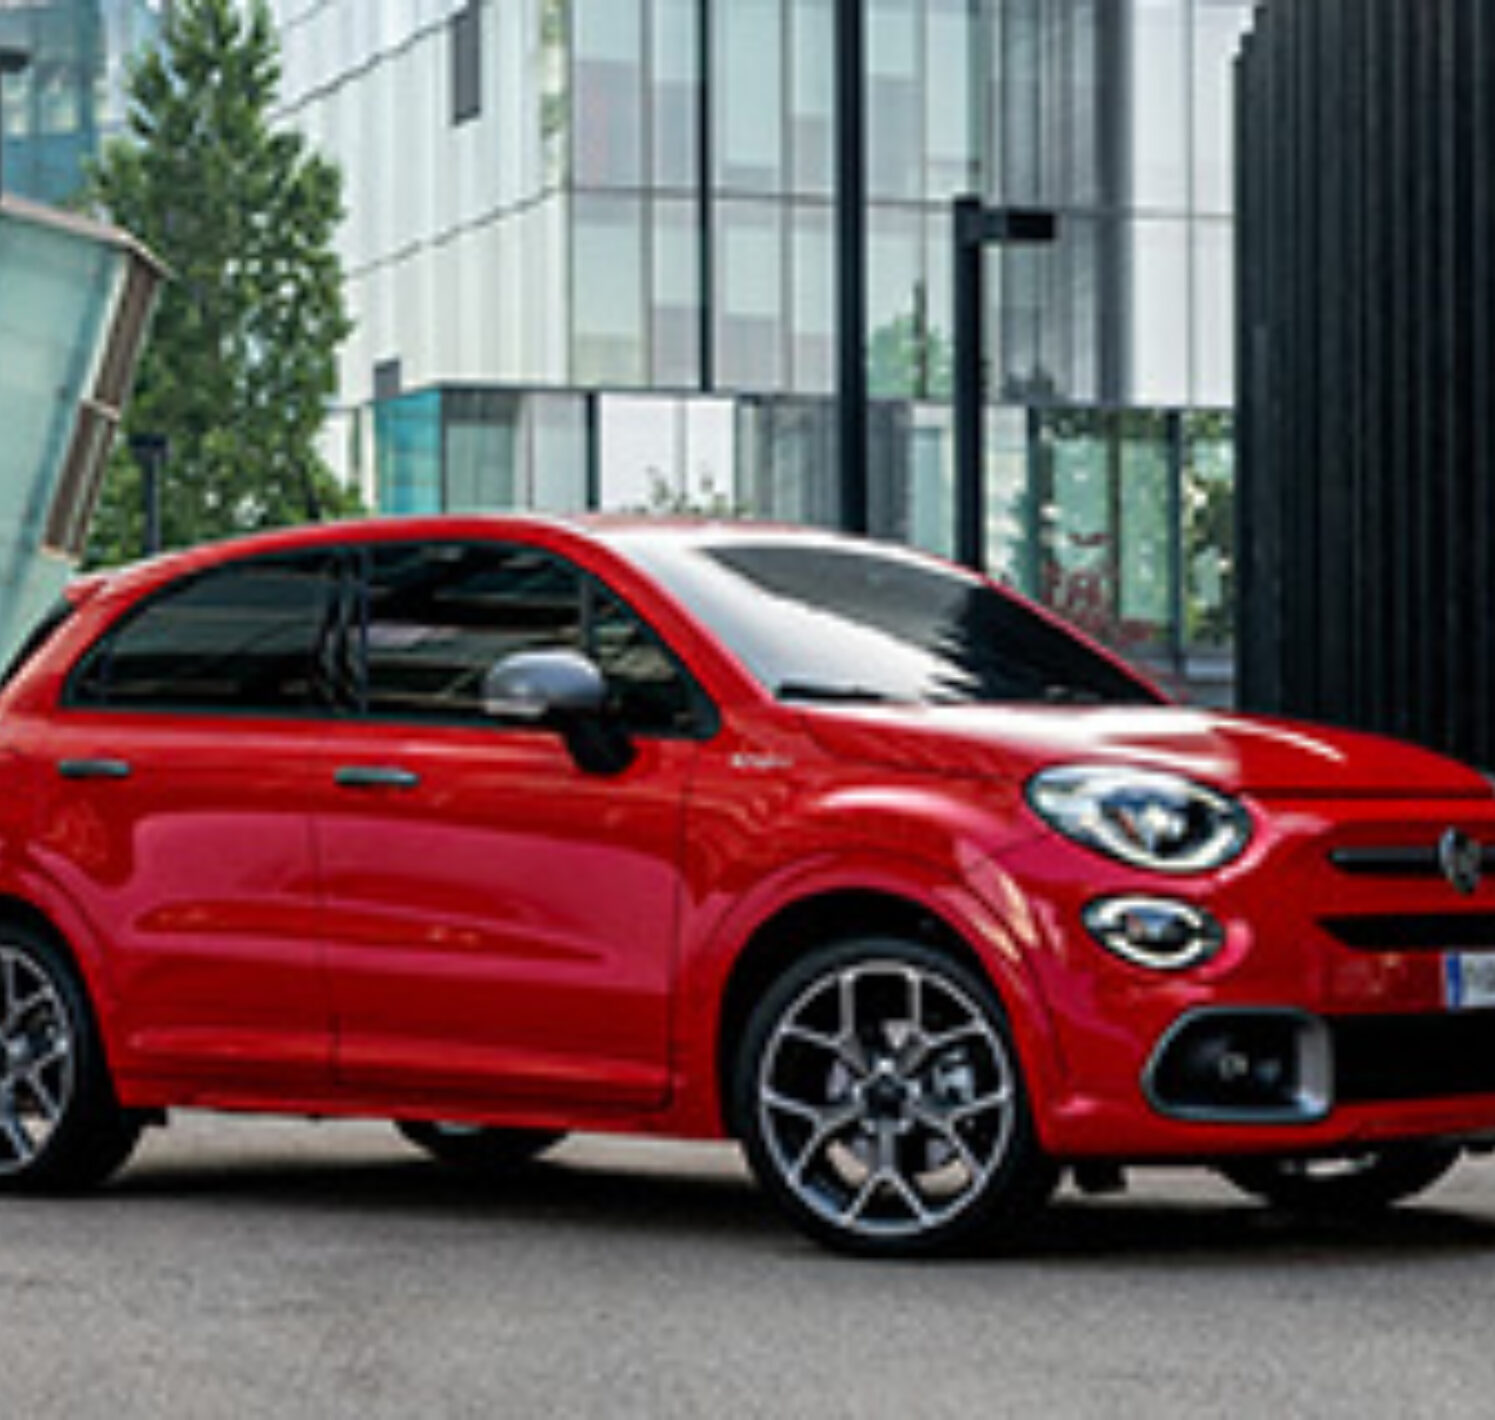 https://autofilter.sk/assets/images/fiat-500-x-urban-look/gallery/fiat-500X-sport-red-suv-01-mobile-300x213-1.jpg - obrazok